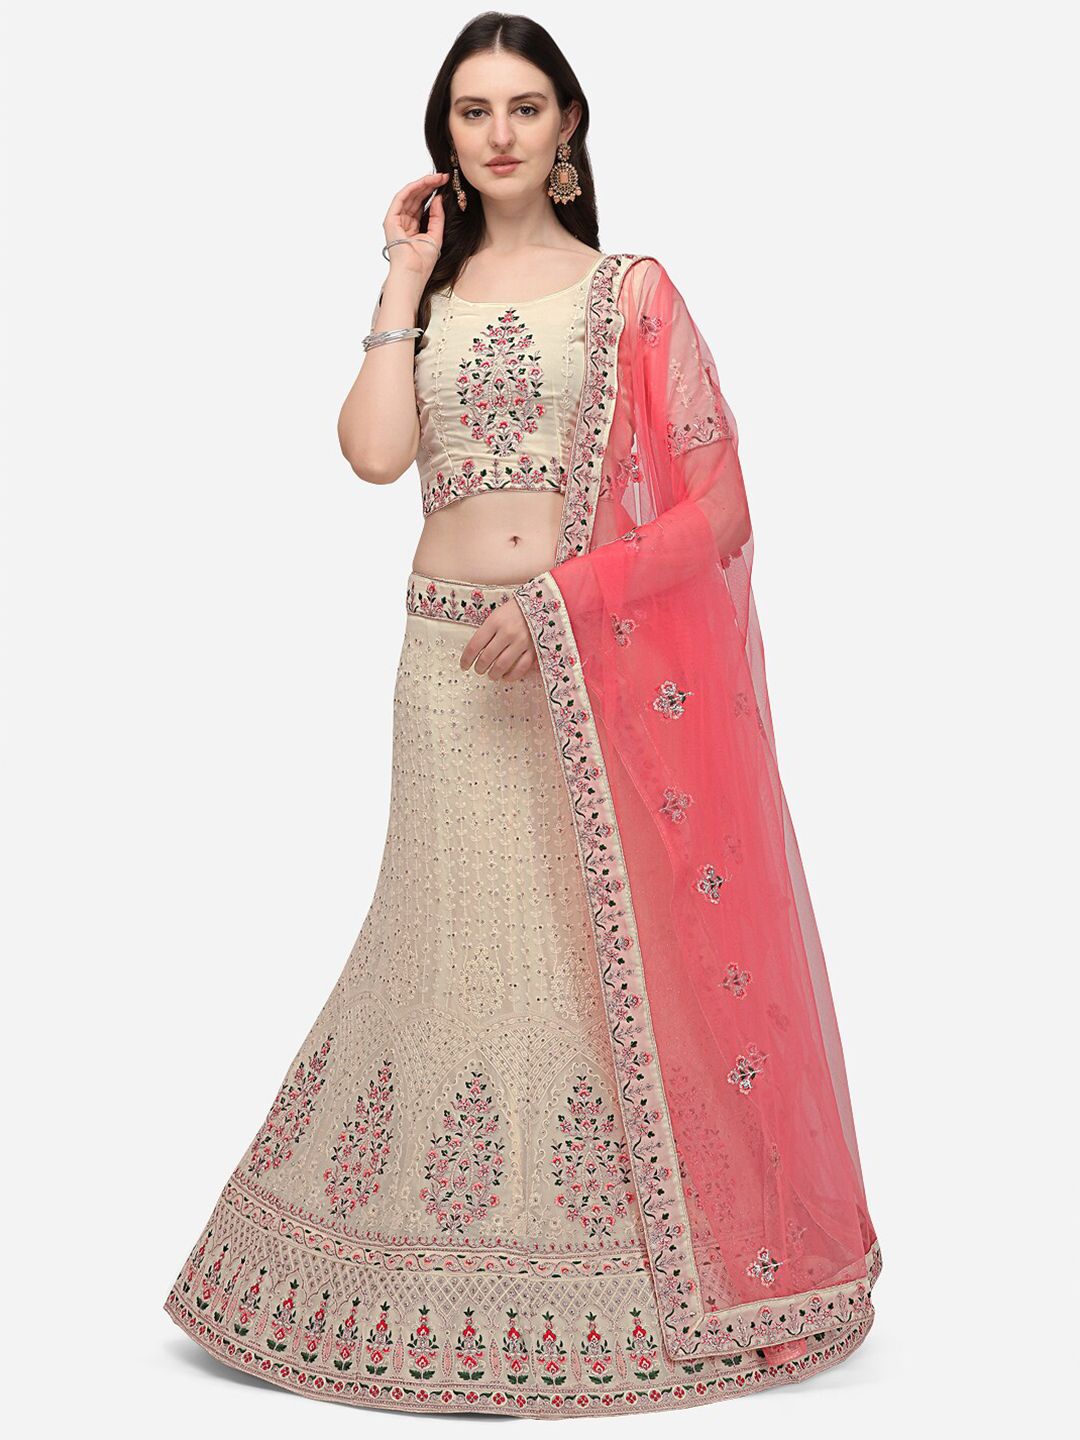 VRSALES Cream-Coloured & Pink Embroidered Semi-Stitched Lehenga & Unstitched Blouse With Dupatta Price in India